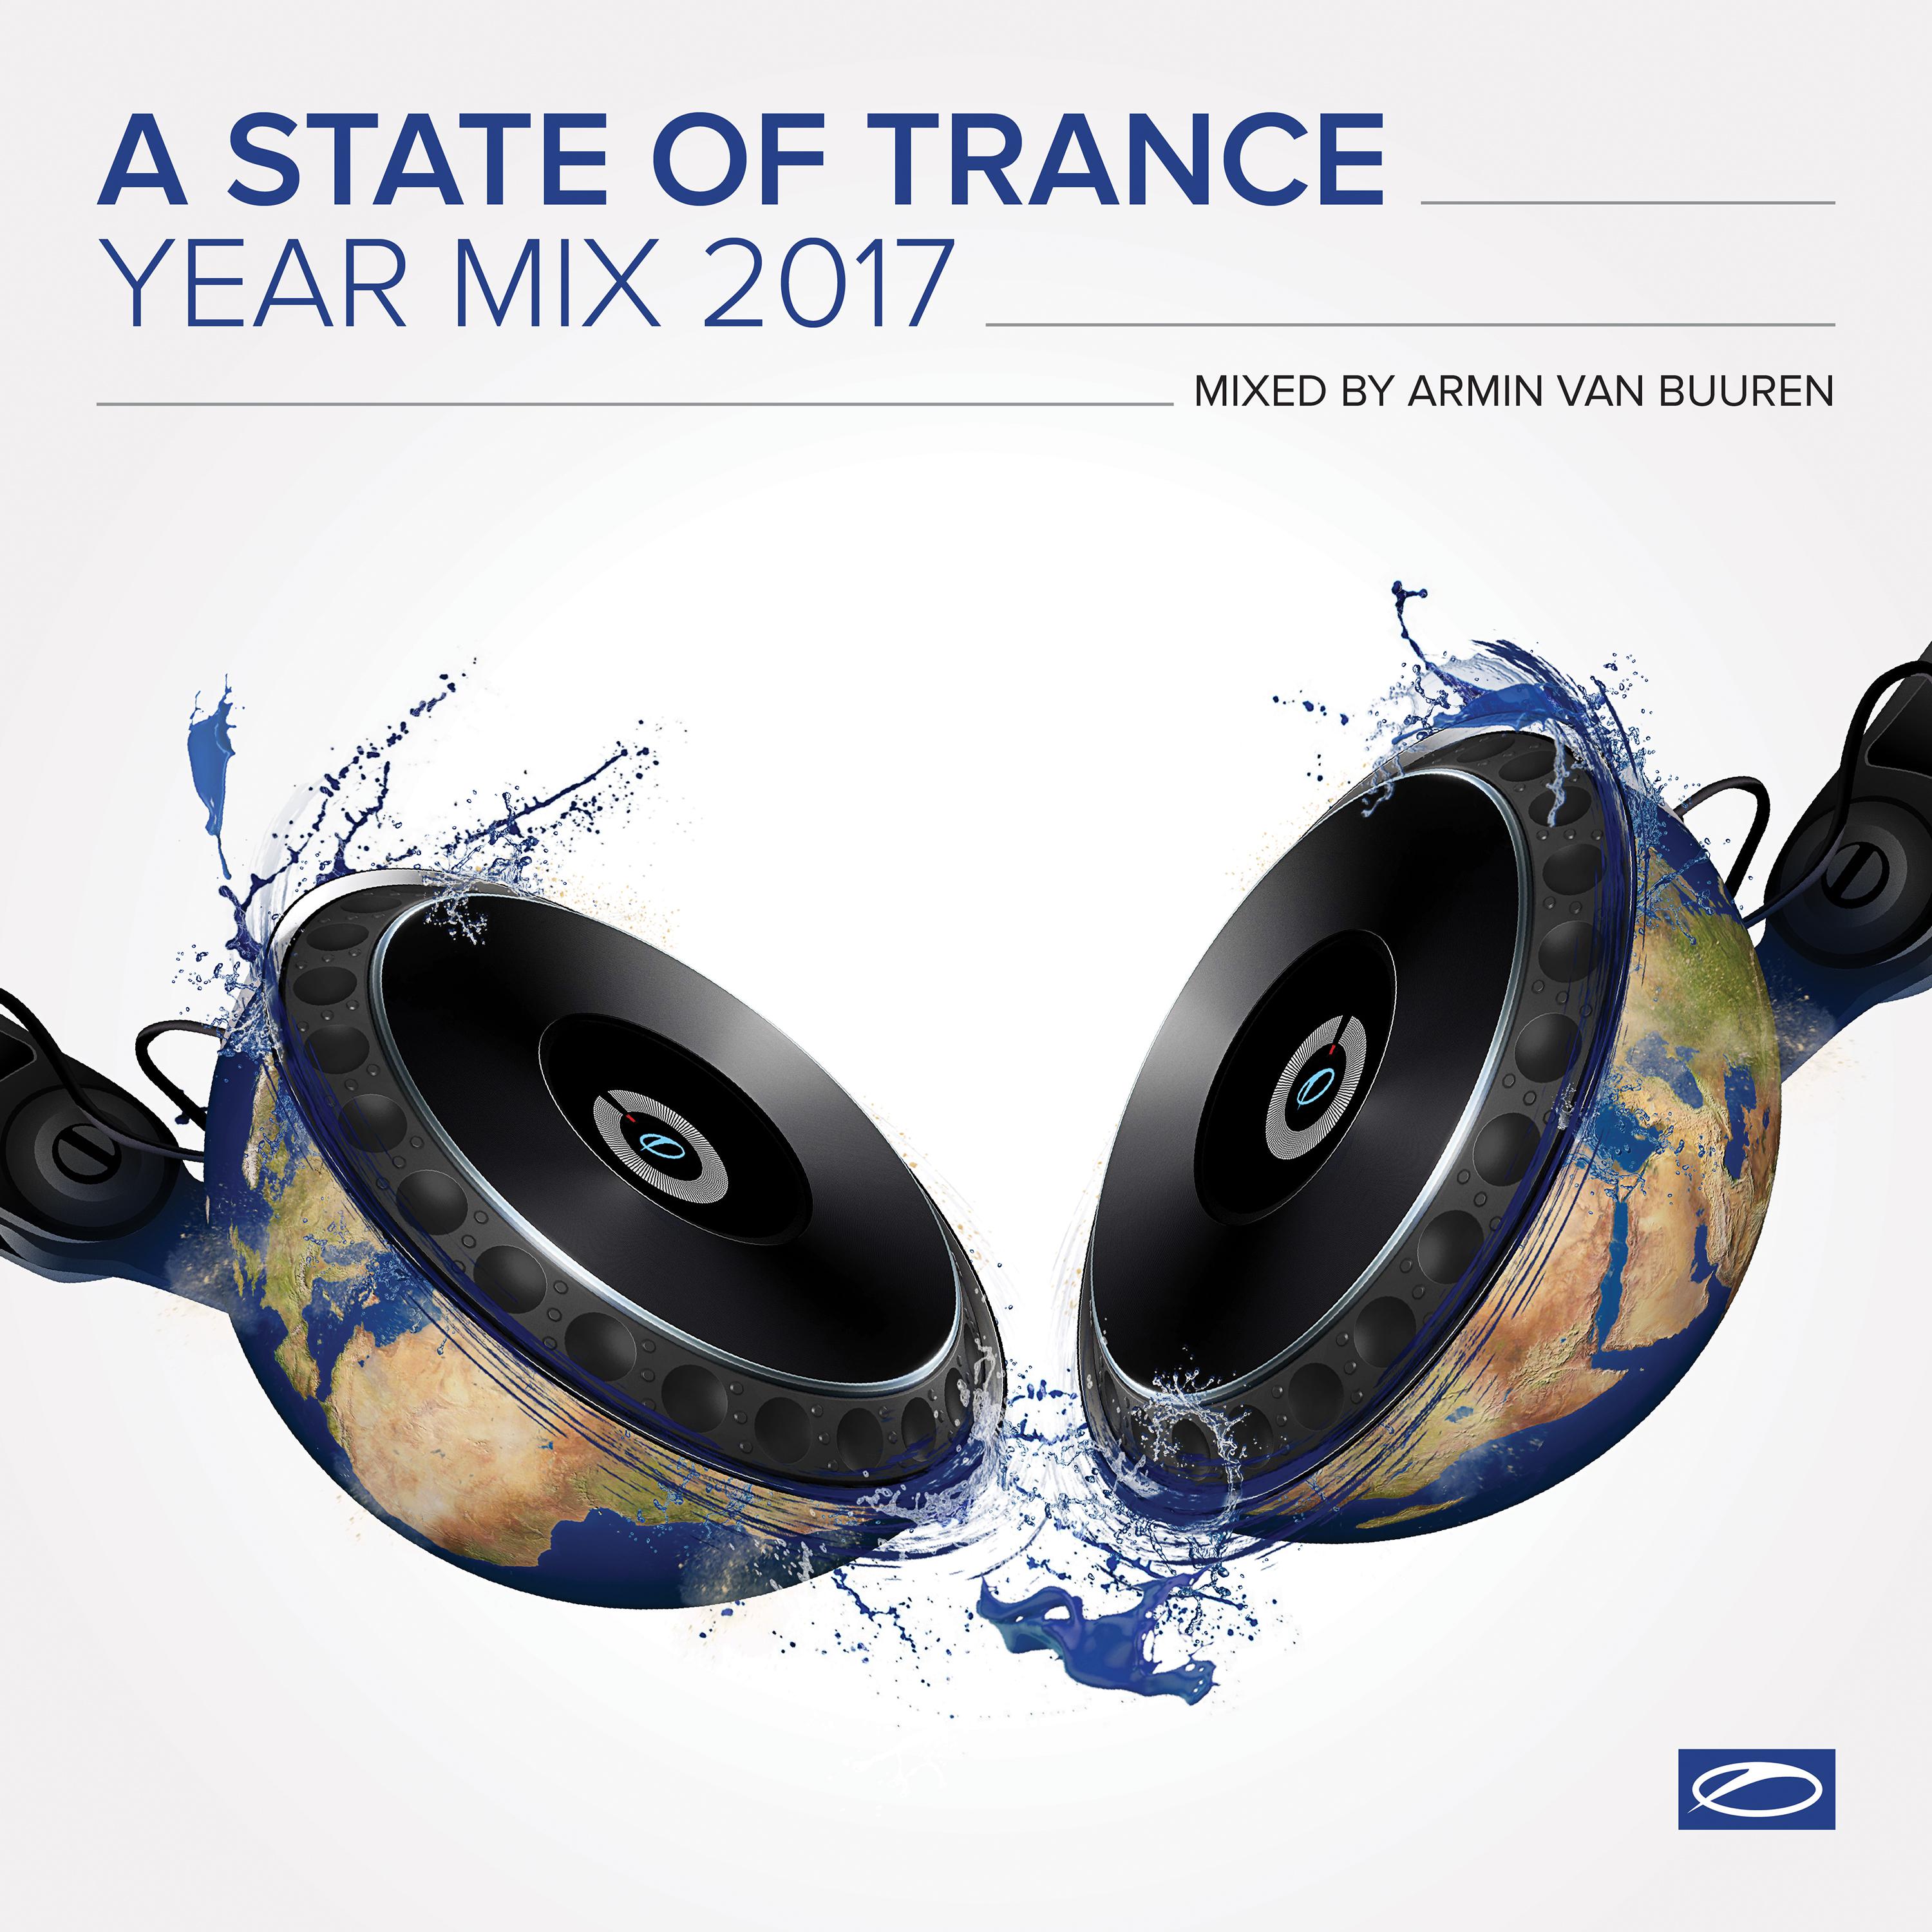 A State Of Trance Year Mix 2017 (Full Continuous Mix, Pt. 1)